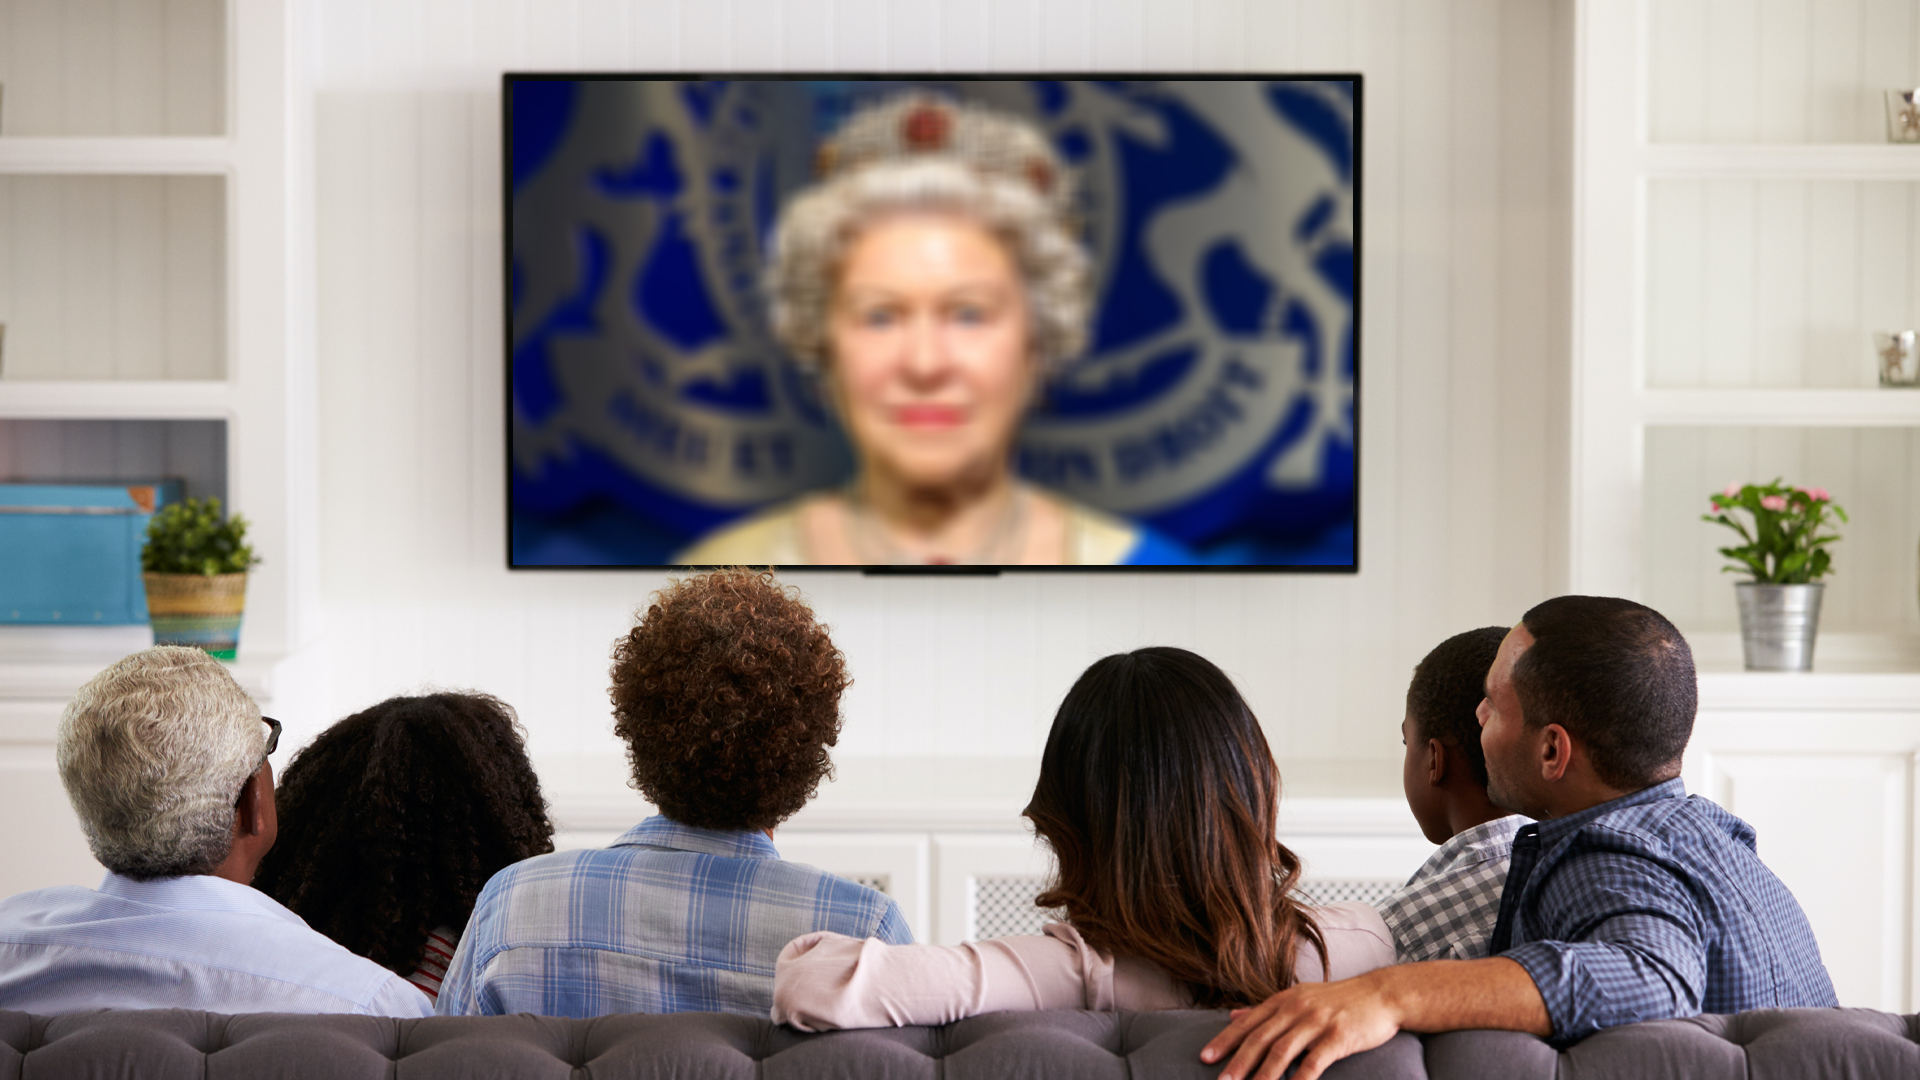 A family watching the Queen's speech on TV